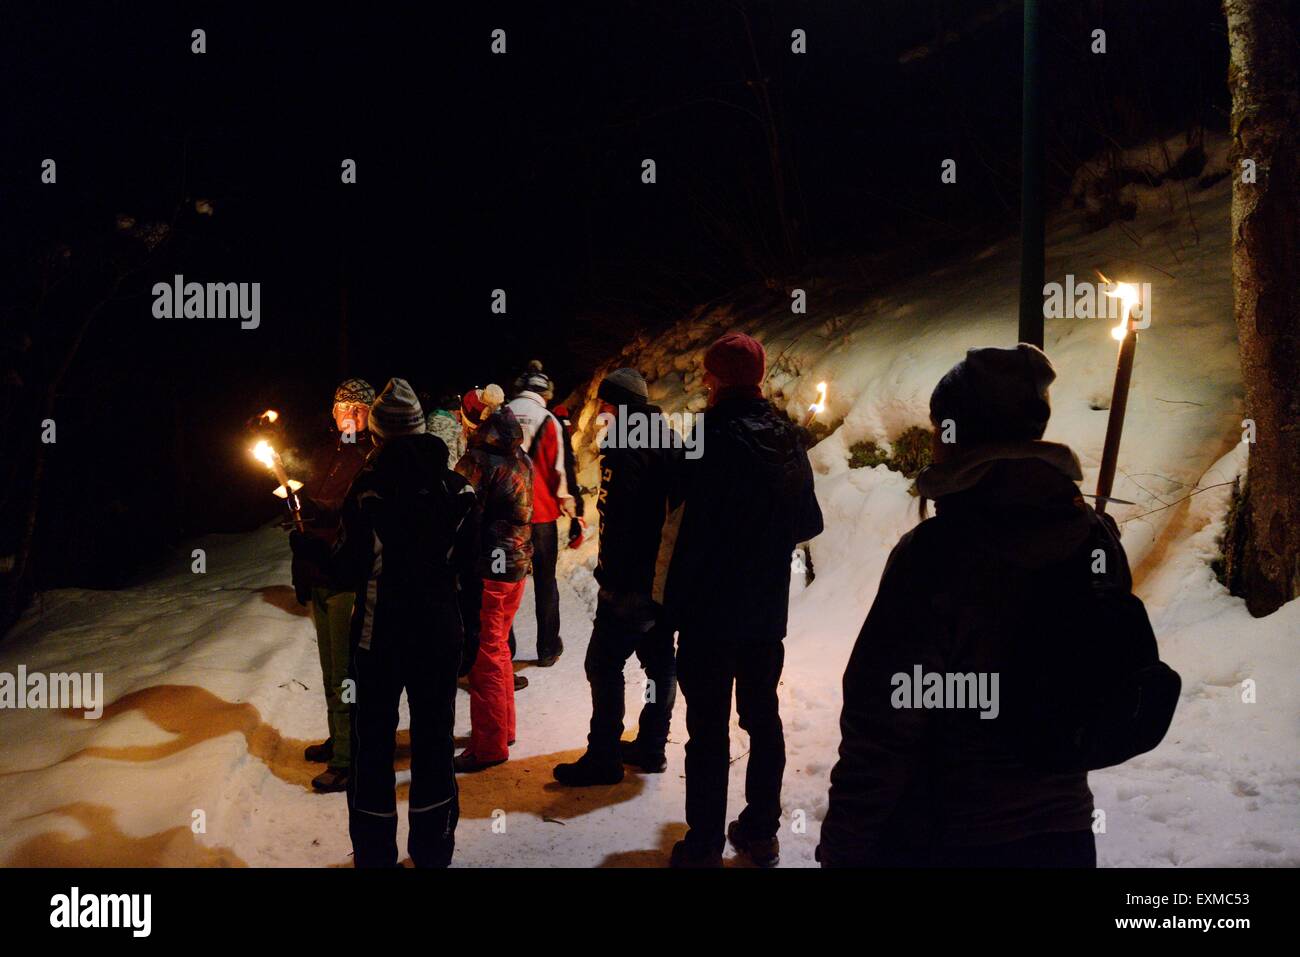 Night walk with flame lit torches, Schladming,Styria,Austria,Alps,Skiing Stock Photo